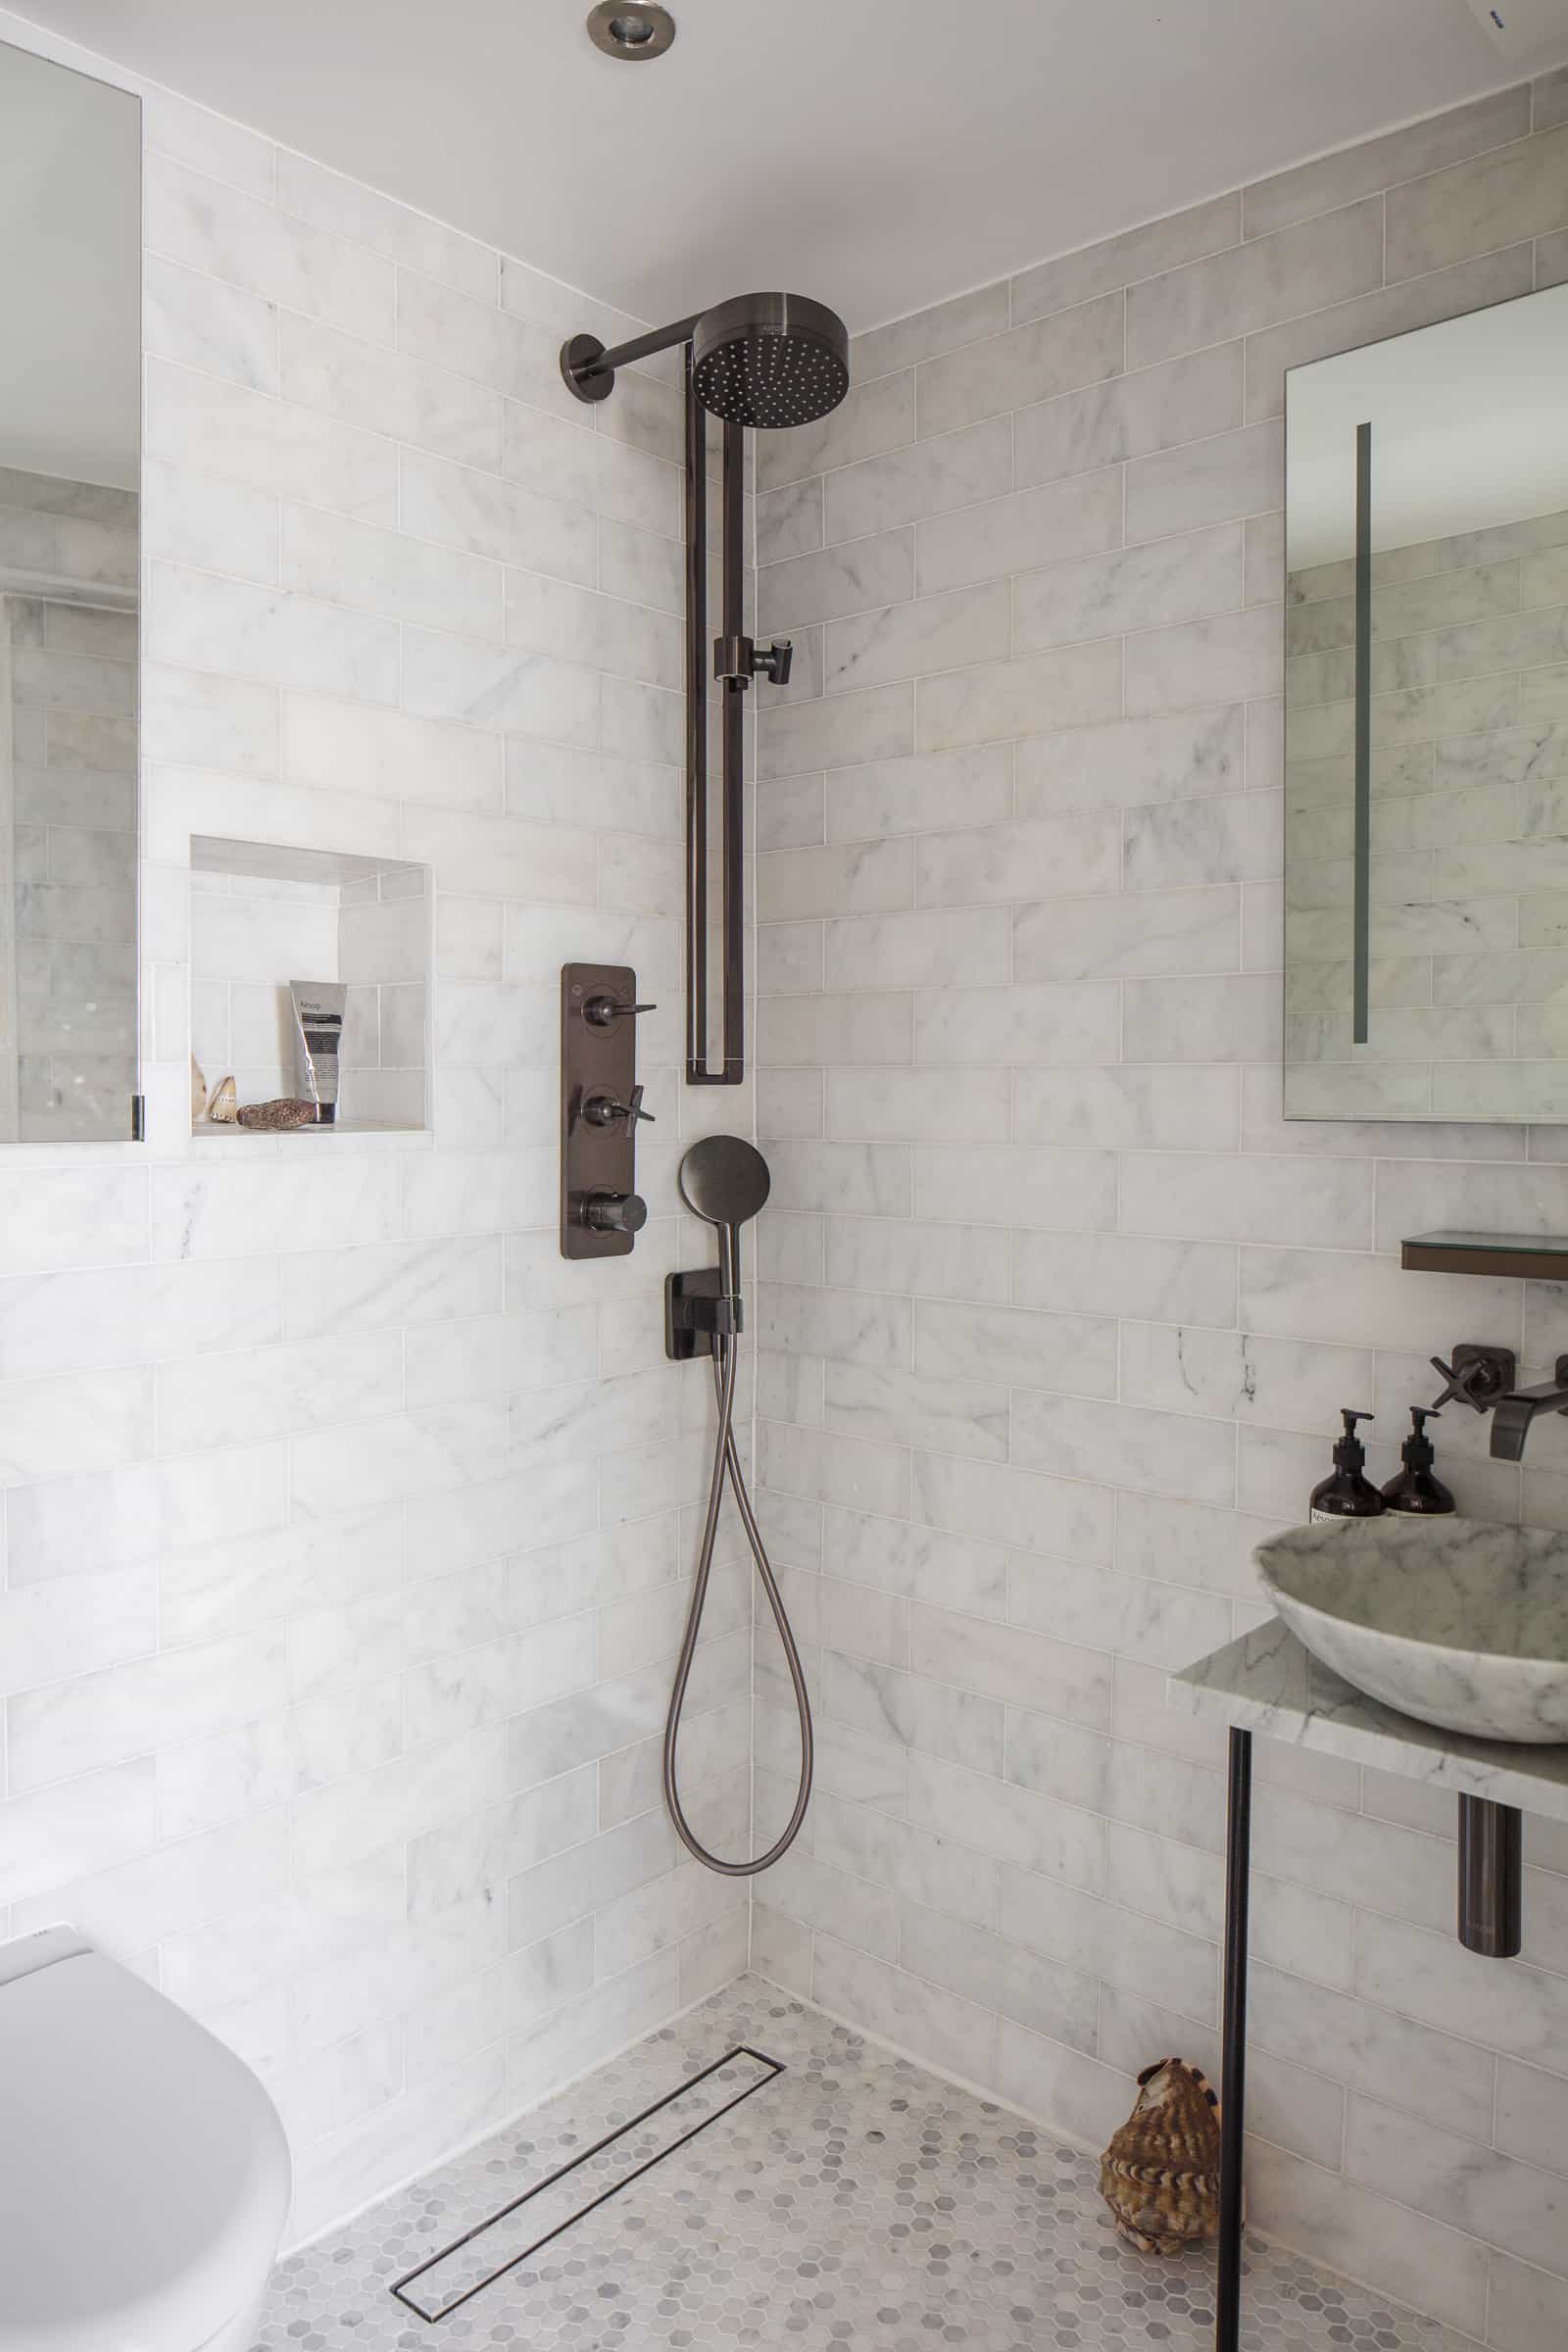 this is an example of sleek shower design in a compact bathroom, featured in the modern house